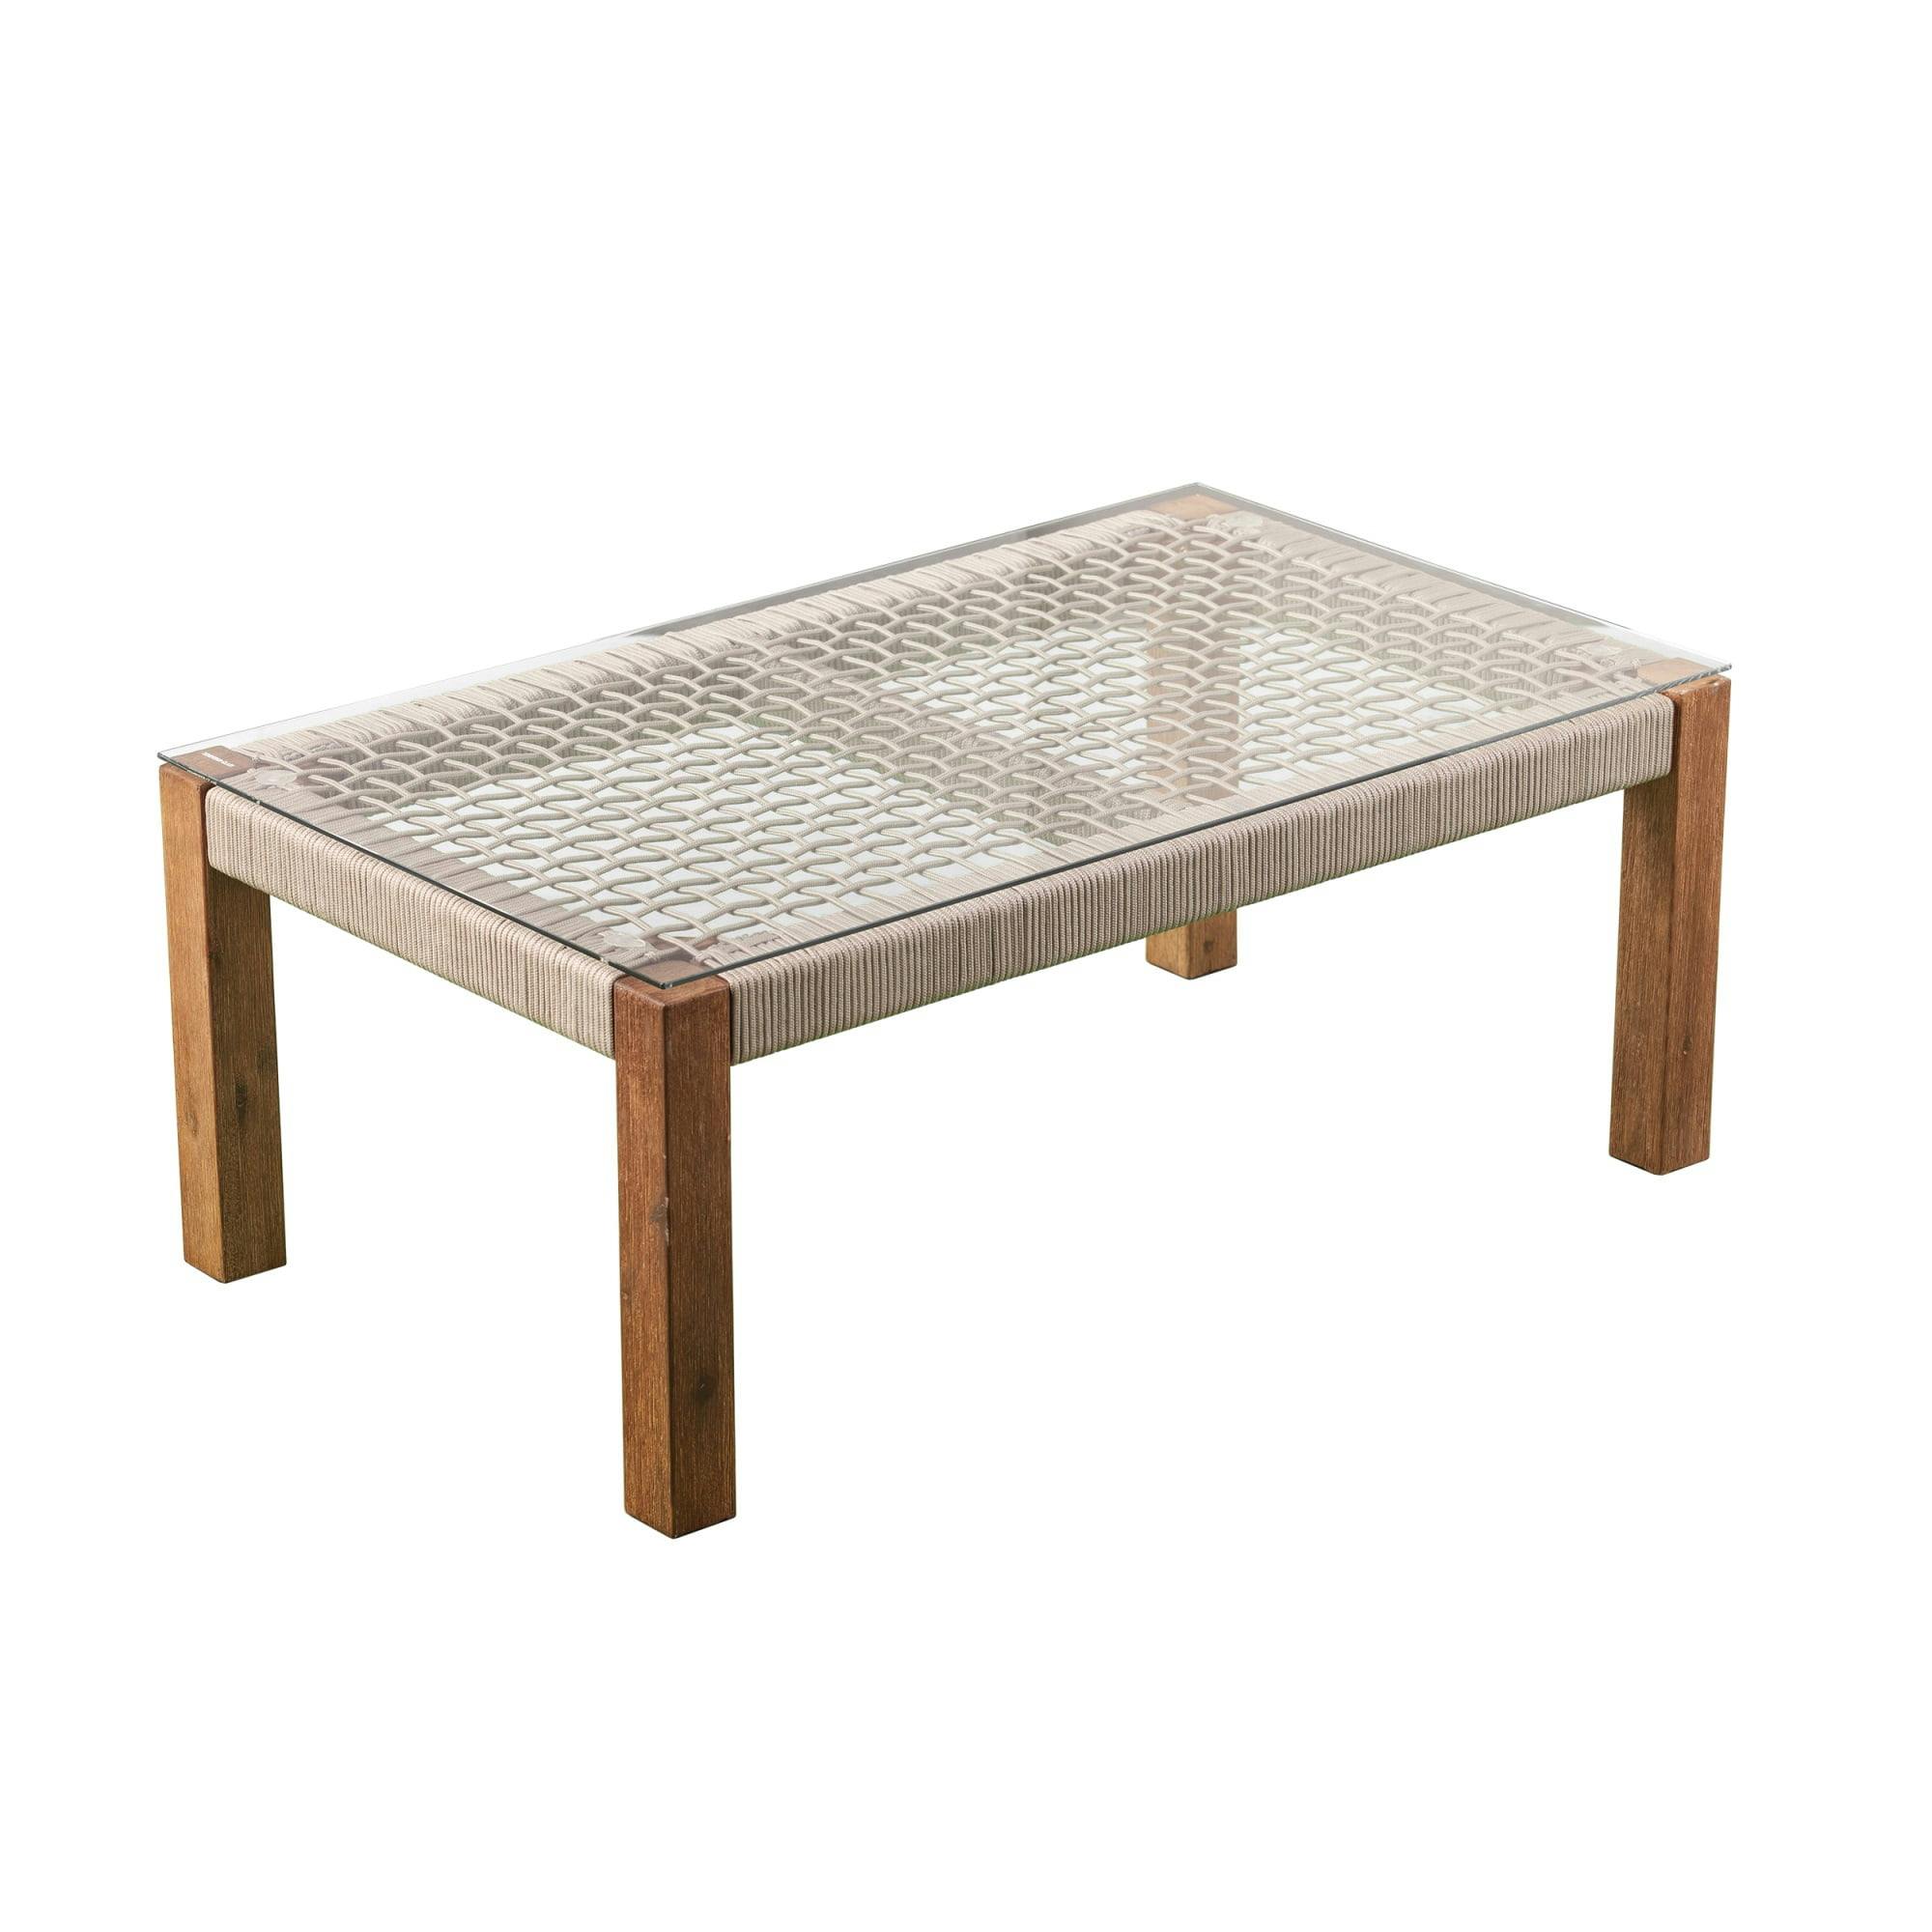 Brendina Natural Acacia and Woven Rope Outdoor Cocktail Table with Glass Top